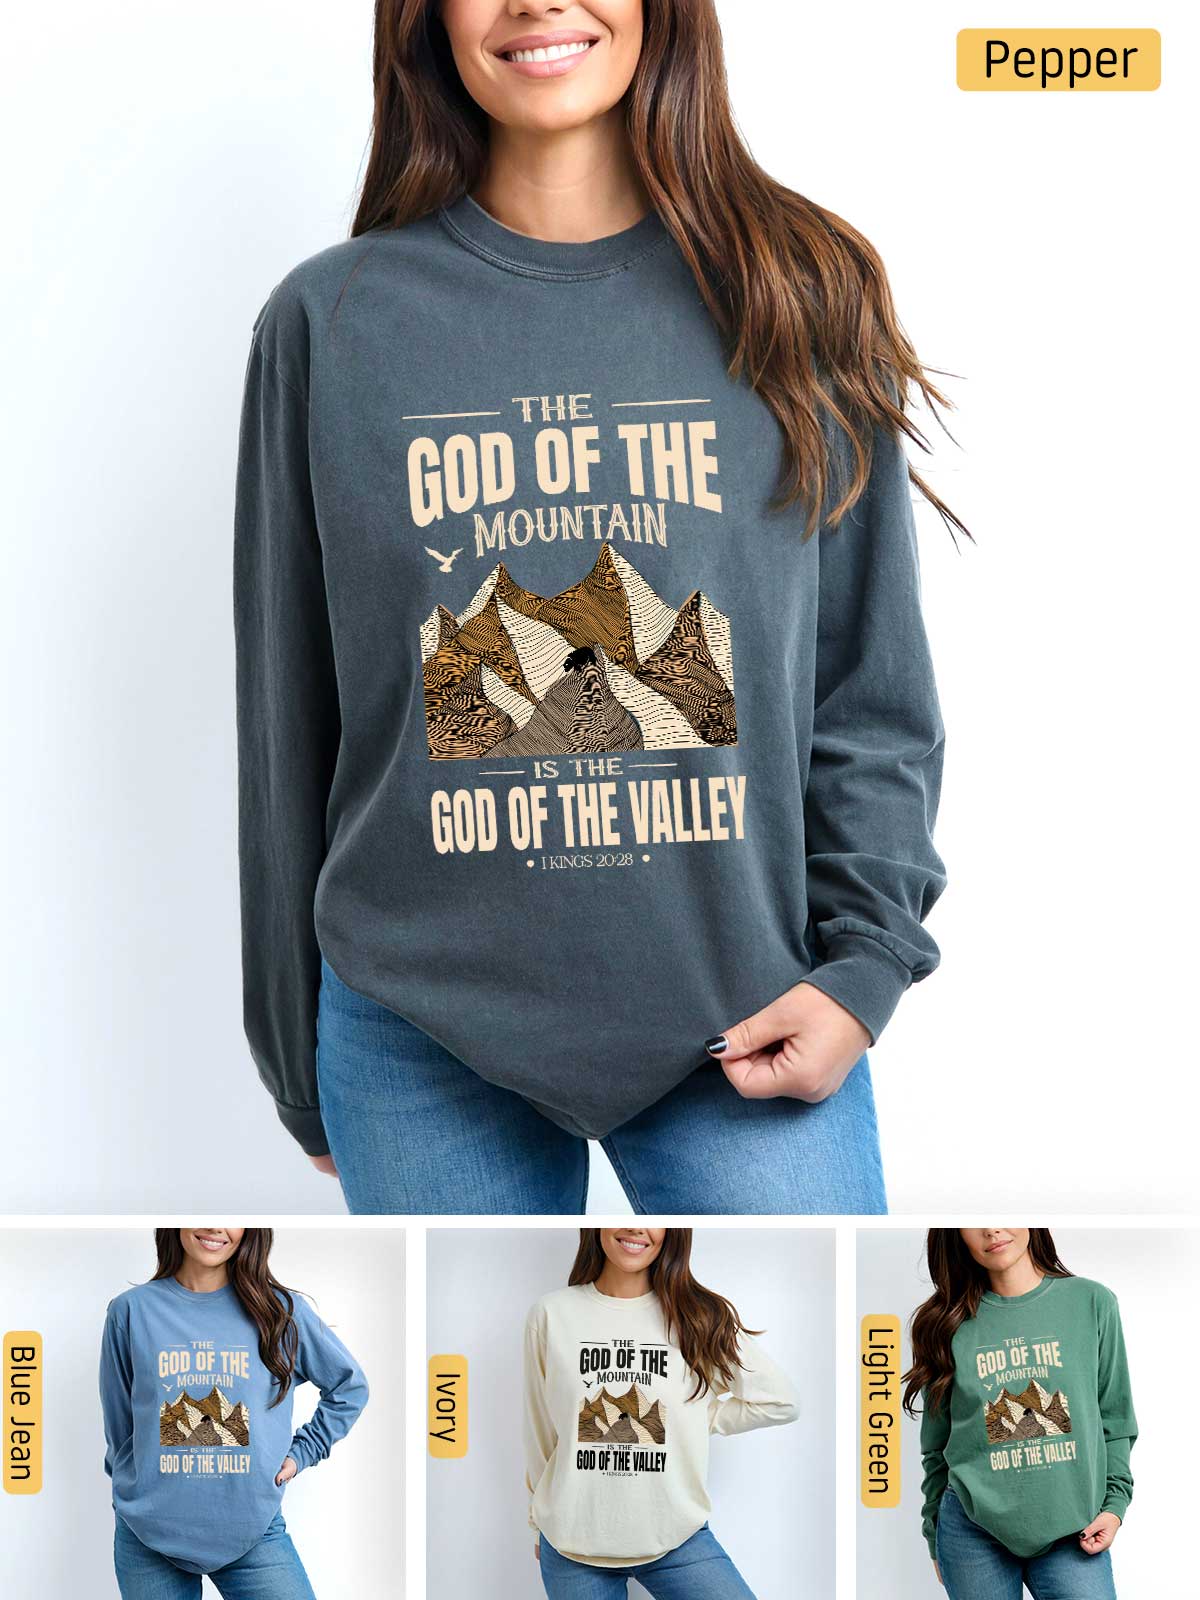 a woman wearing a sweatshirt that says god of the mountain